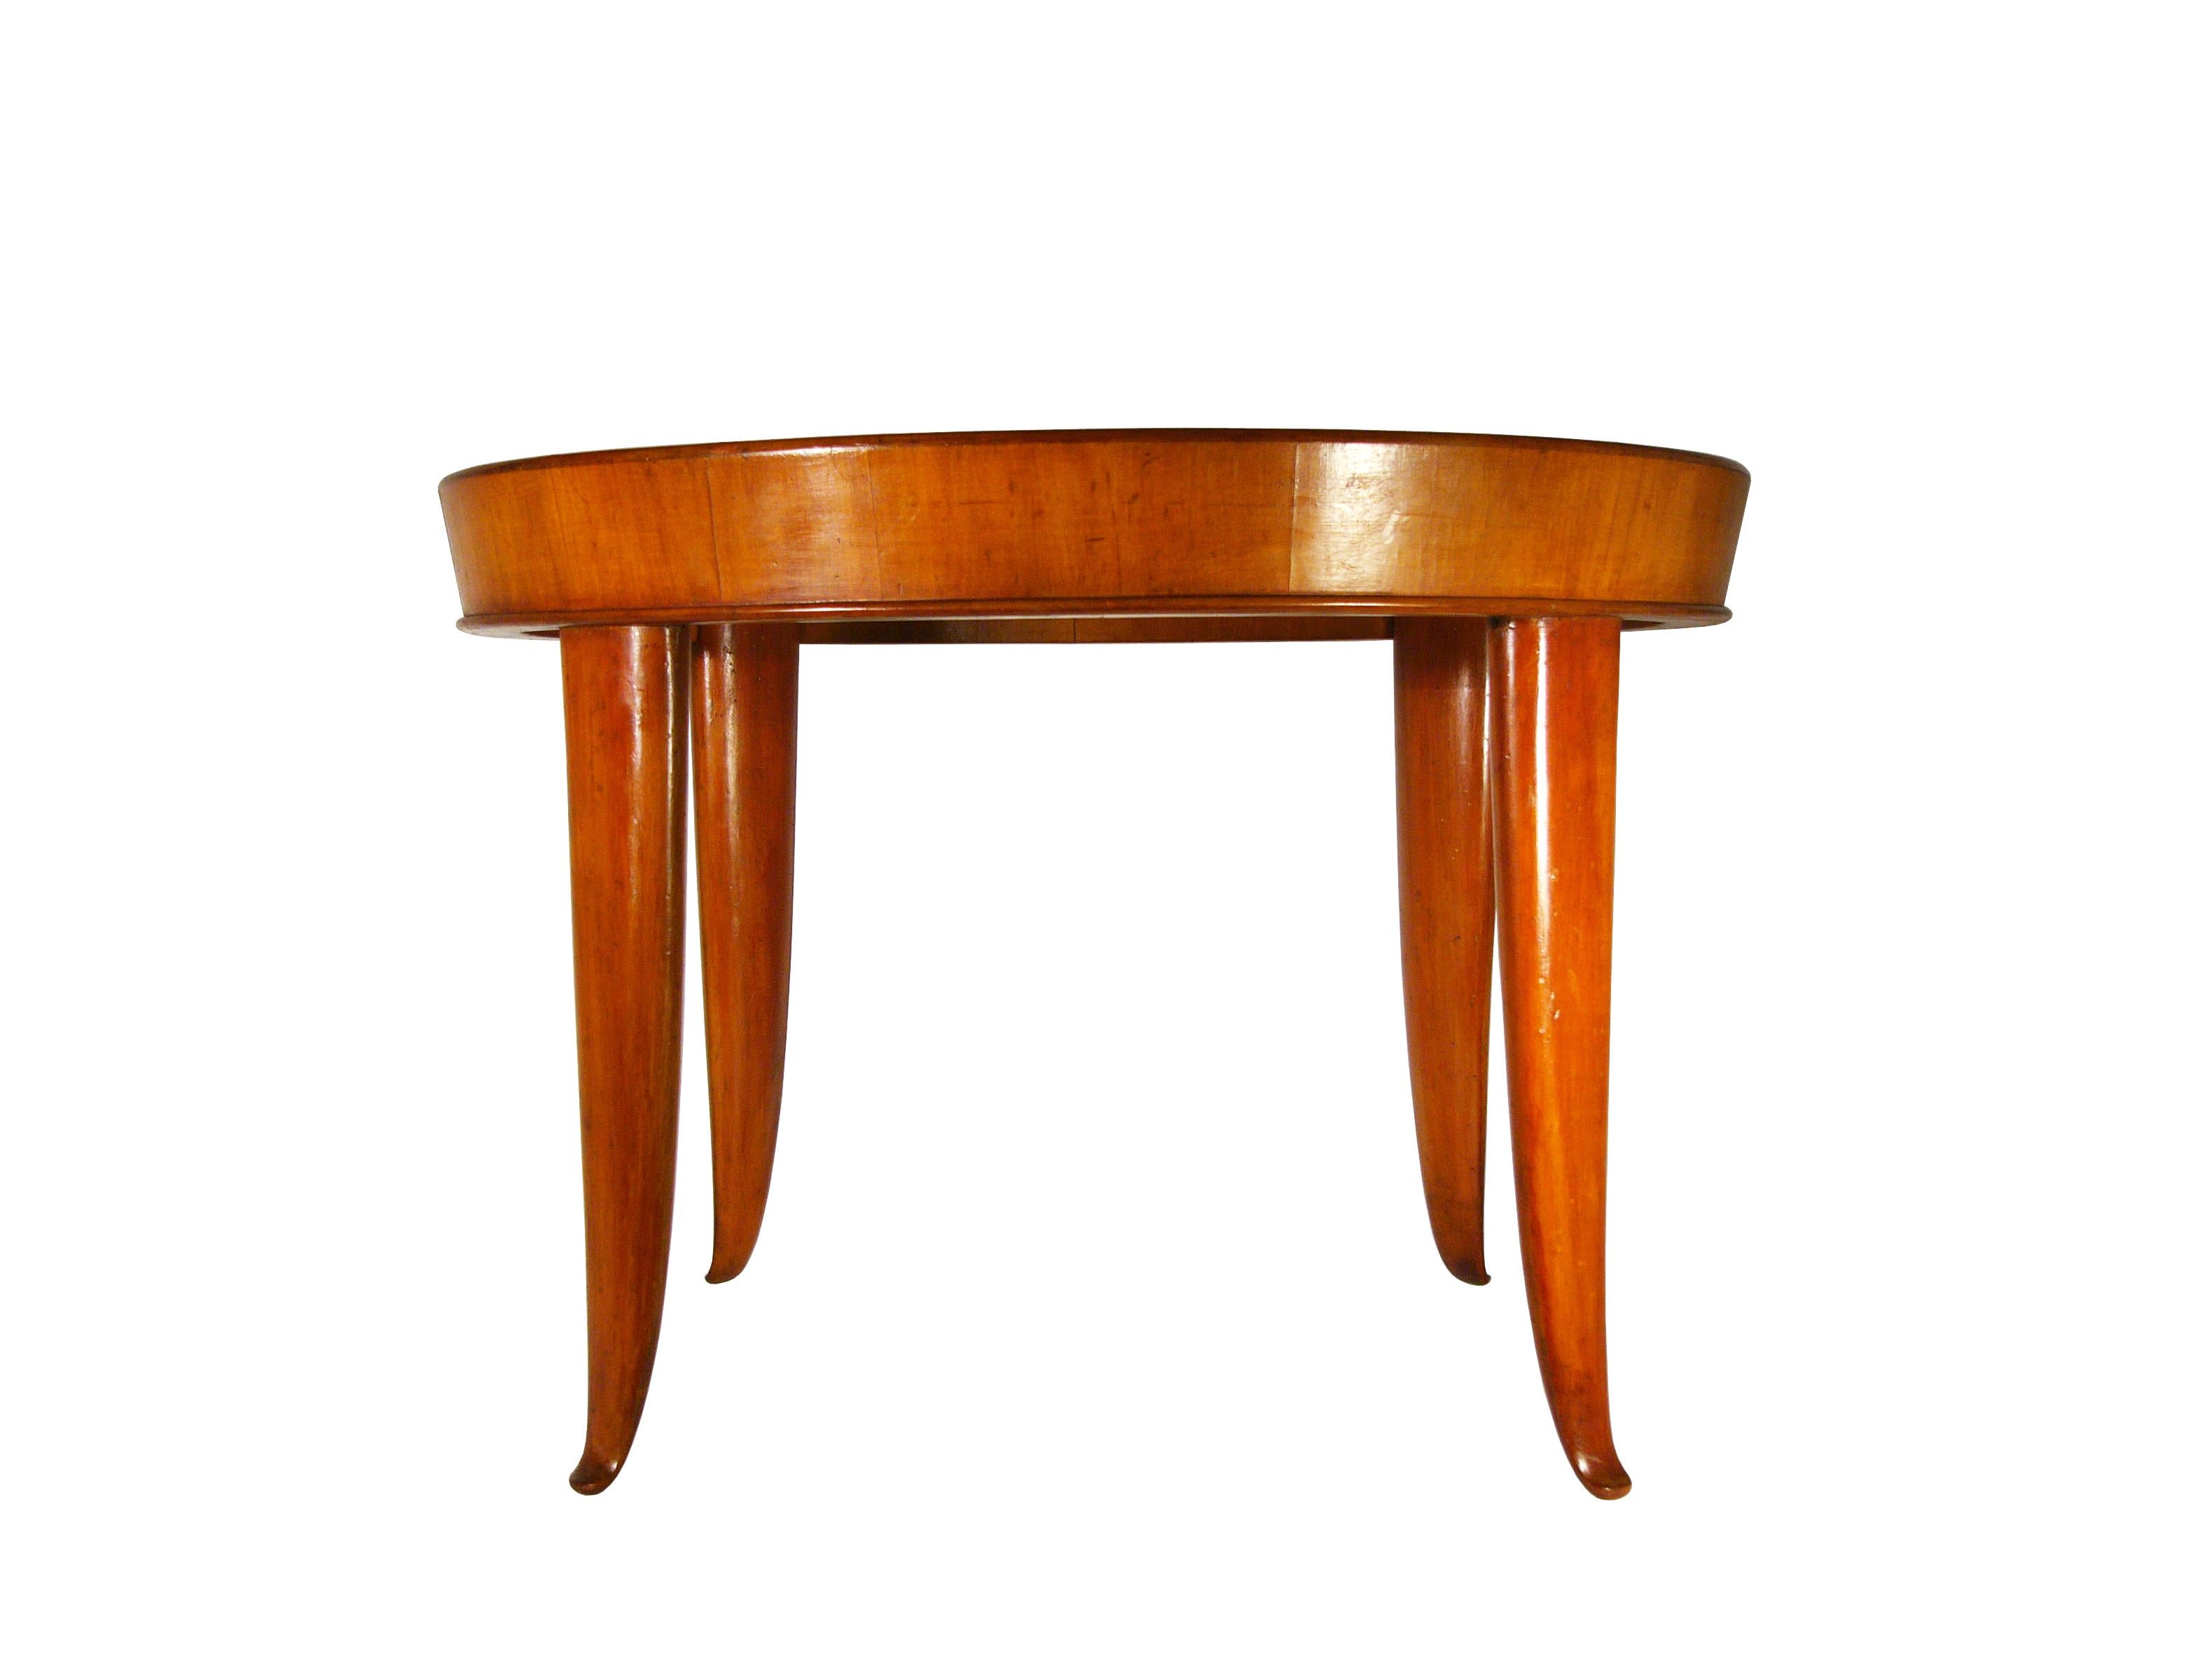 This elegant coffee table was produced in Italy in the 1940s and it is attributed to Guglielmo Ulrich, as it resembles other very models closely. It is made from a wooden structure with a round glass top. The table has been partially restored and